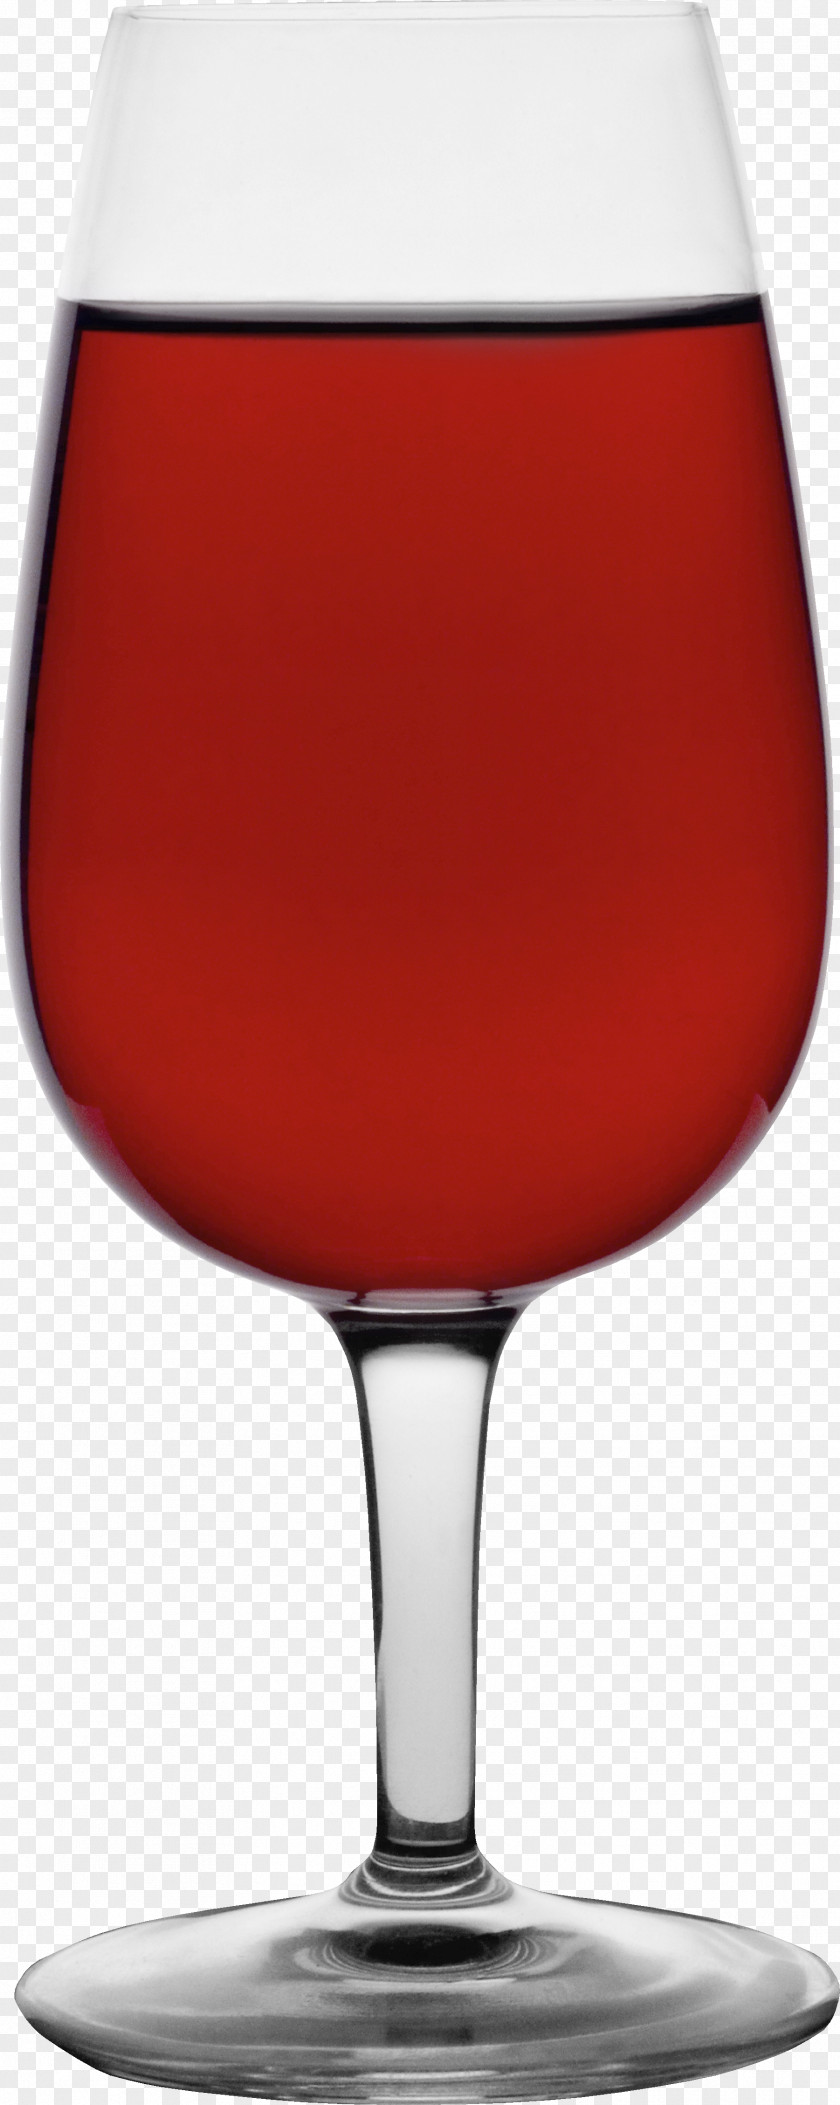 Glass Image PNG